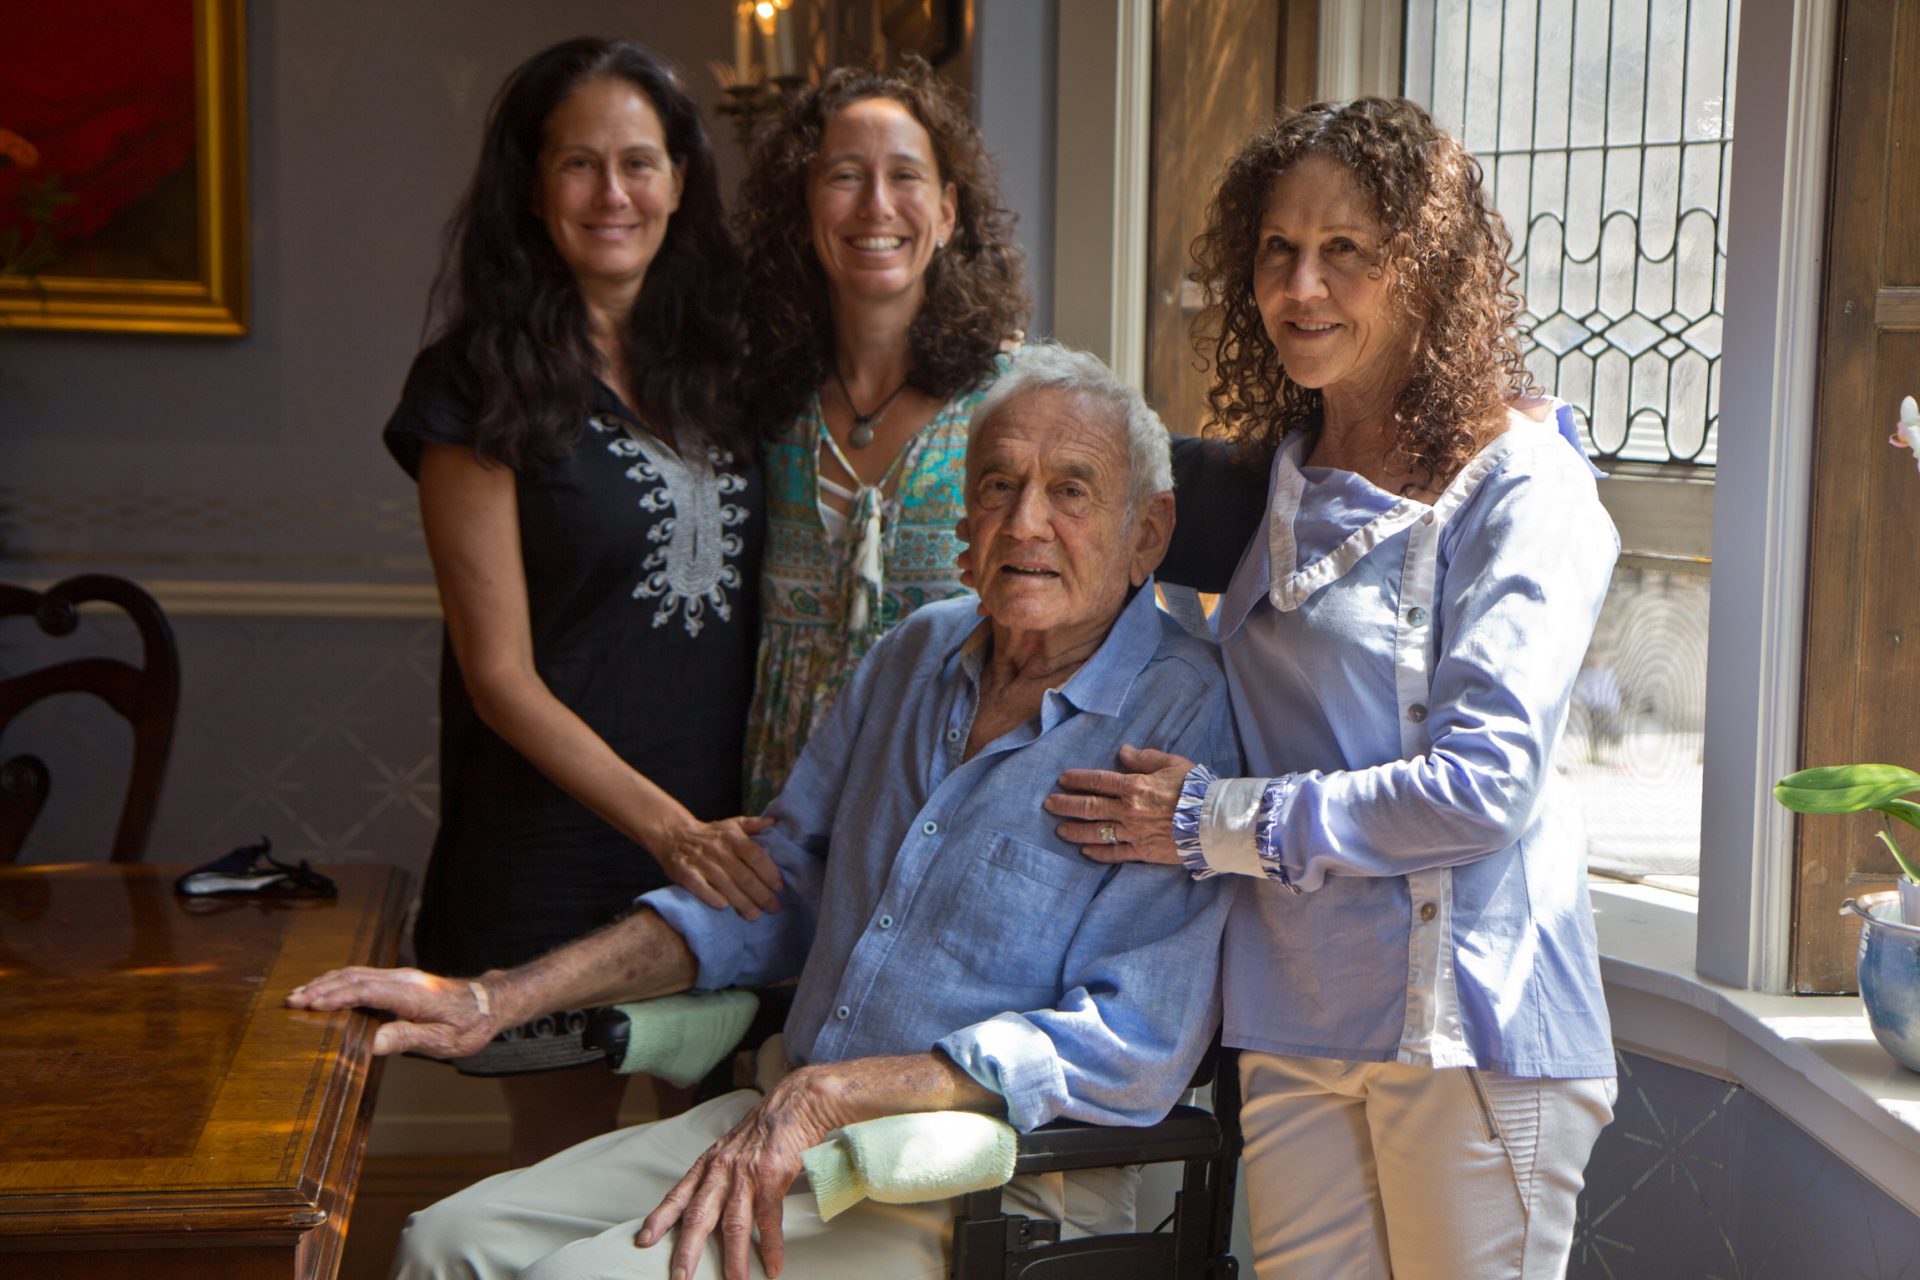 Rita Woidislawsky (right), her husband Avram (second from right) and their daughters Gal Jurick (left) and Tal Erez (second from left).